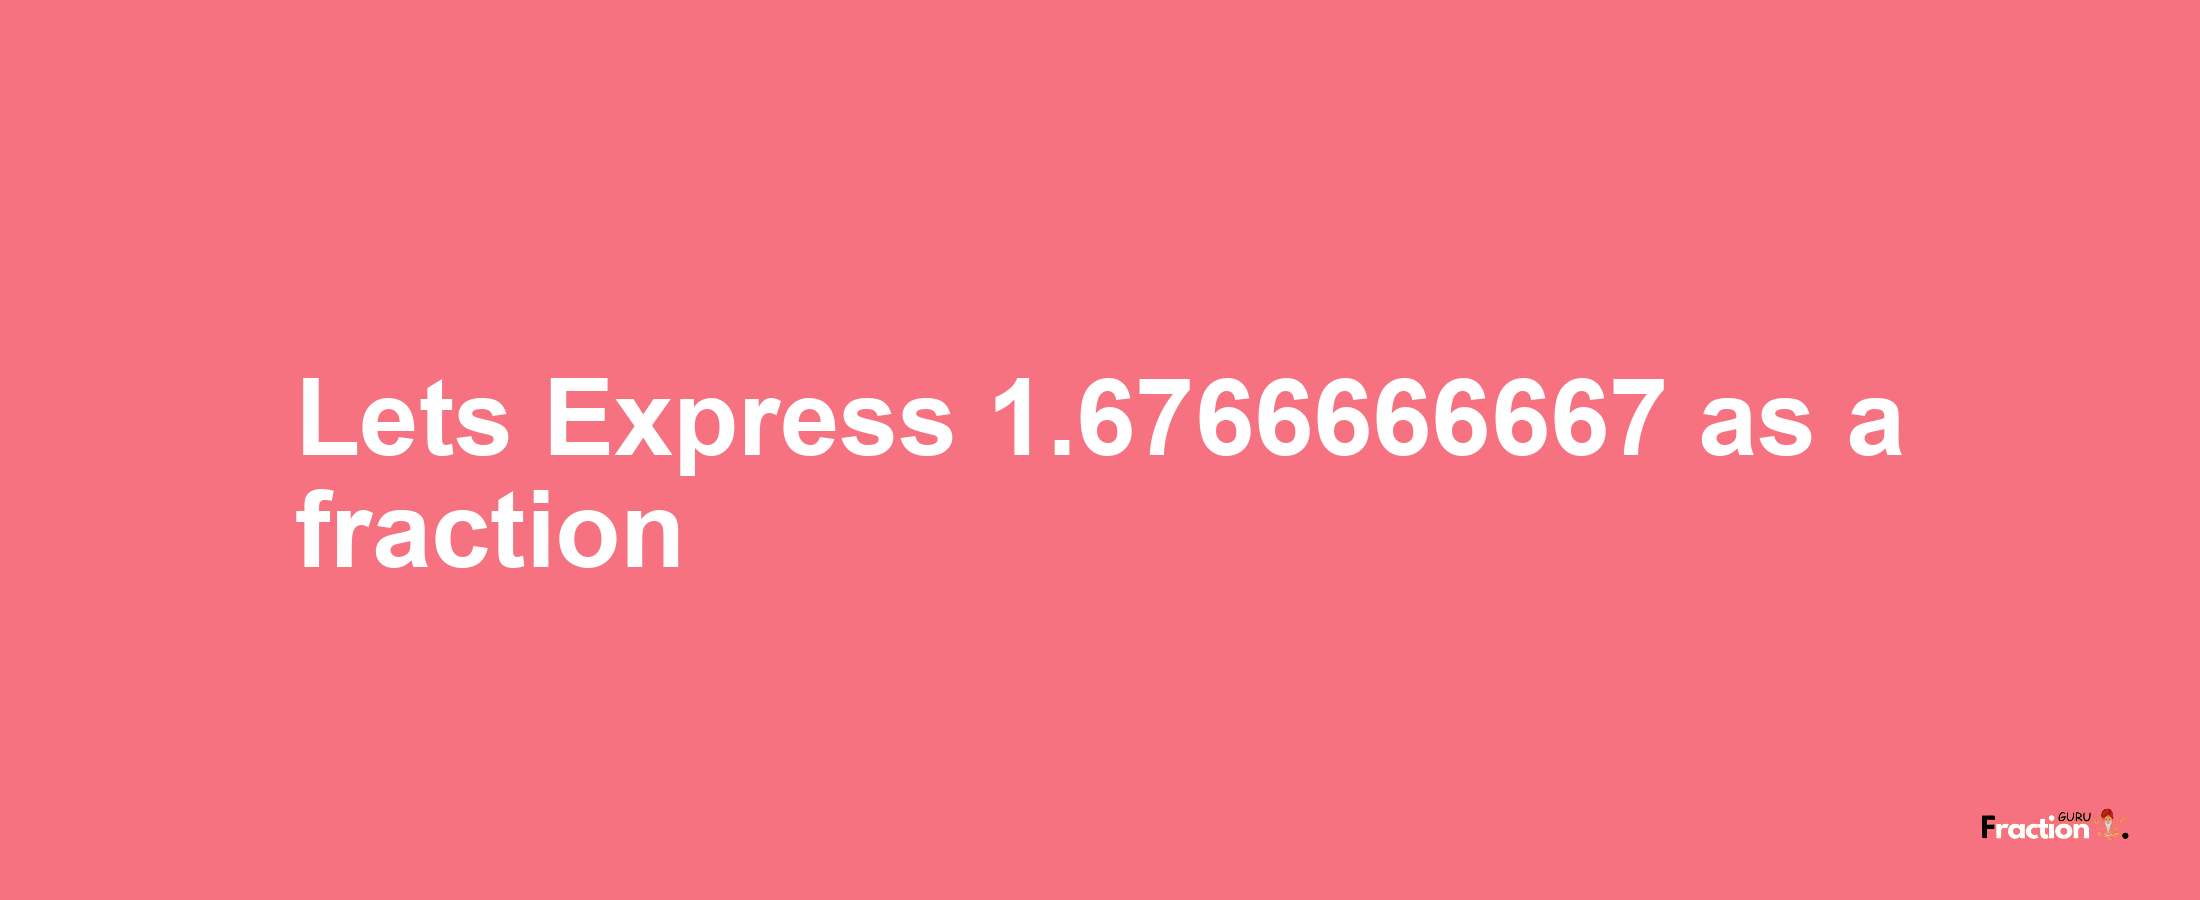 Lets Express 1.6766666667 as afraction